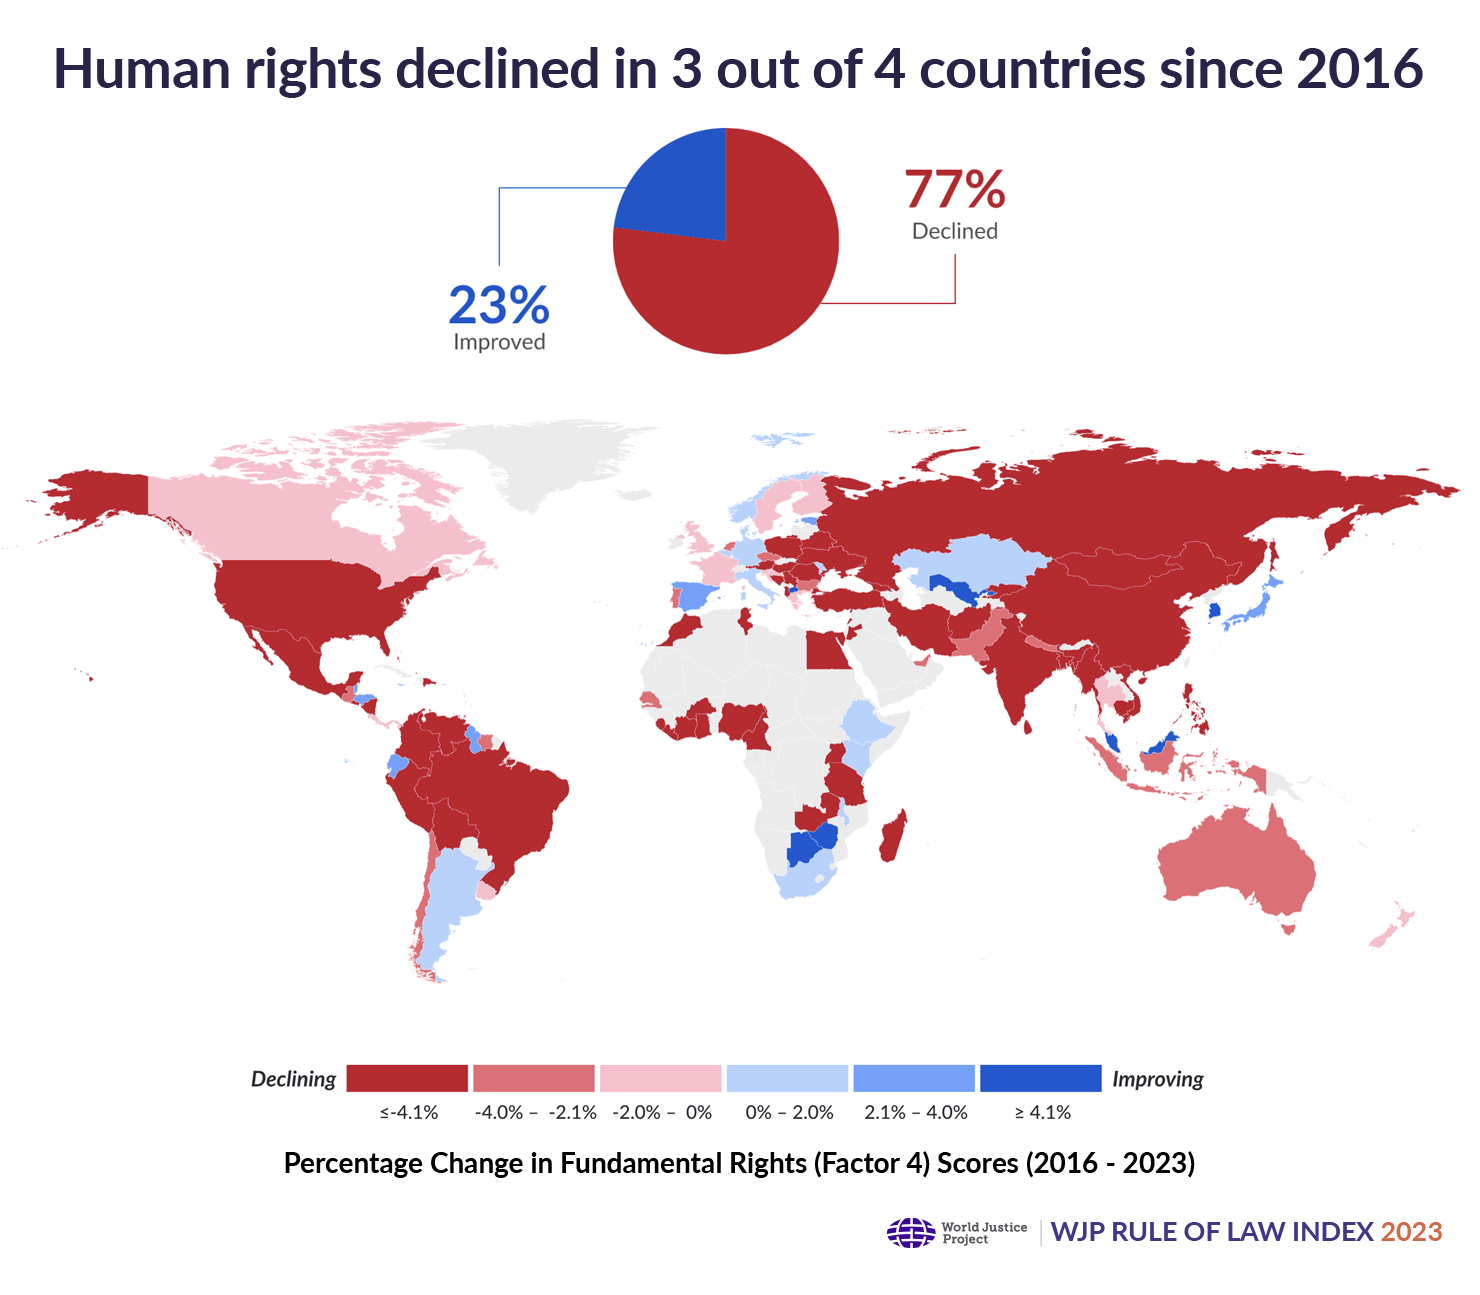 Since 2016, fundamental rights have declined in more than three-quarters of countries in the WJP Rule of Law Index.